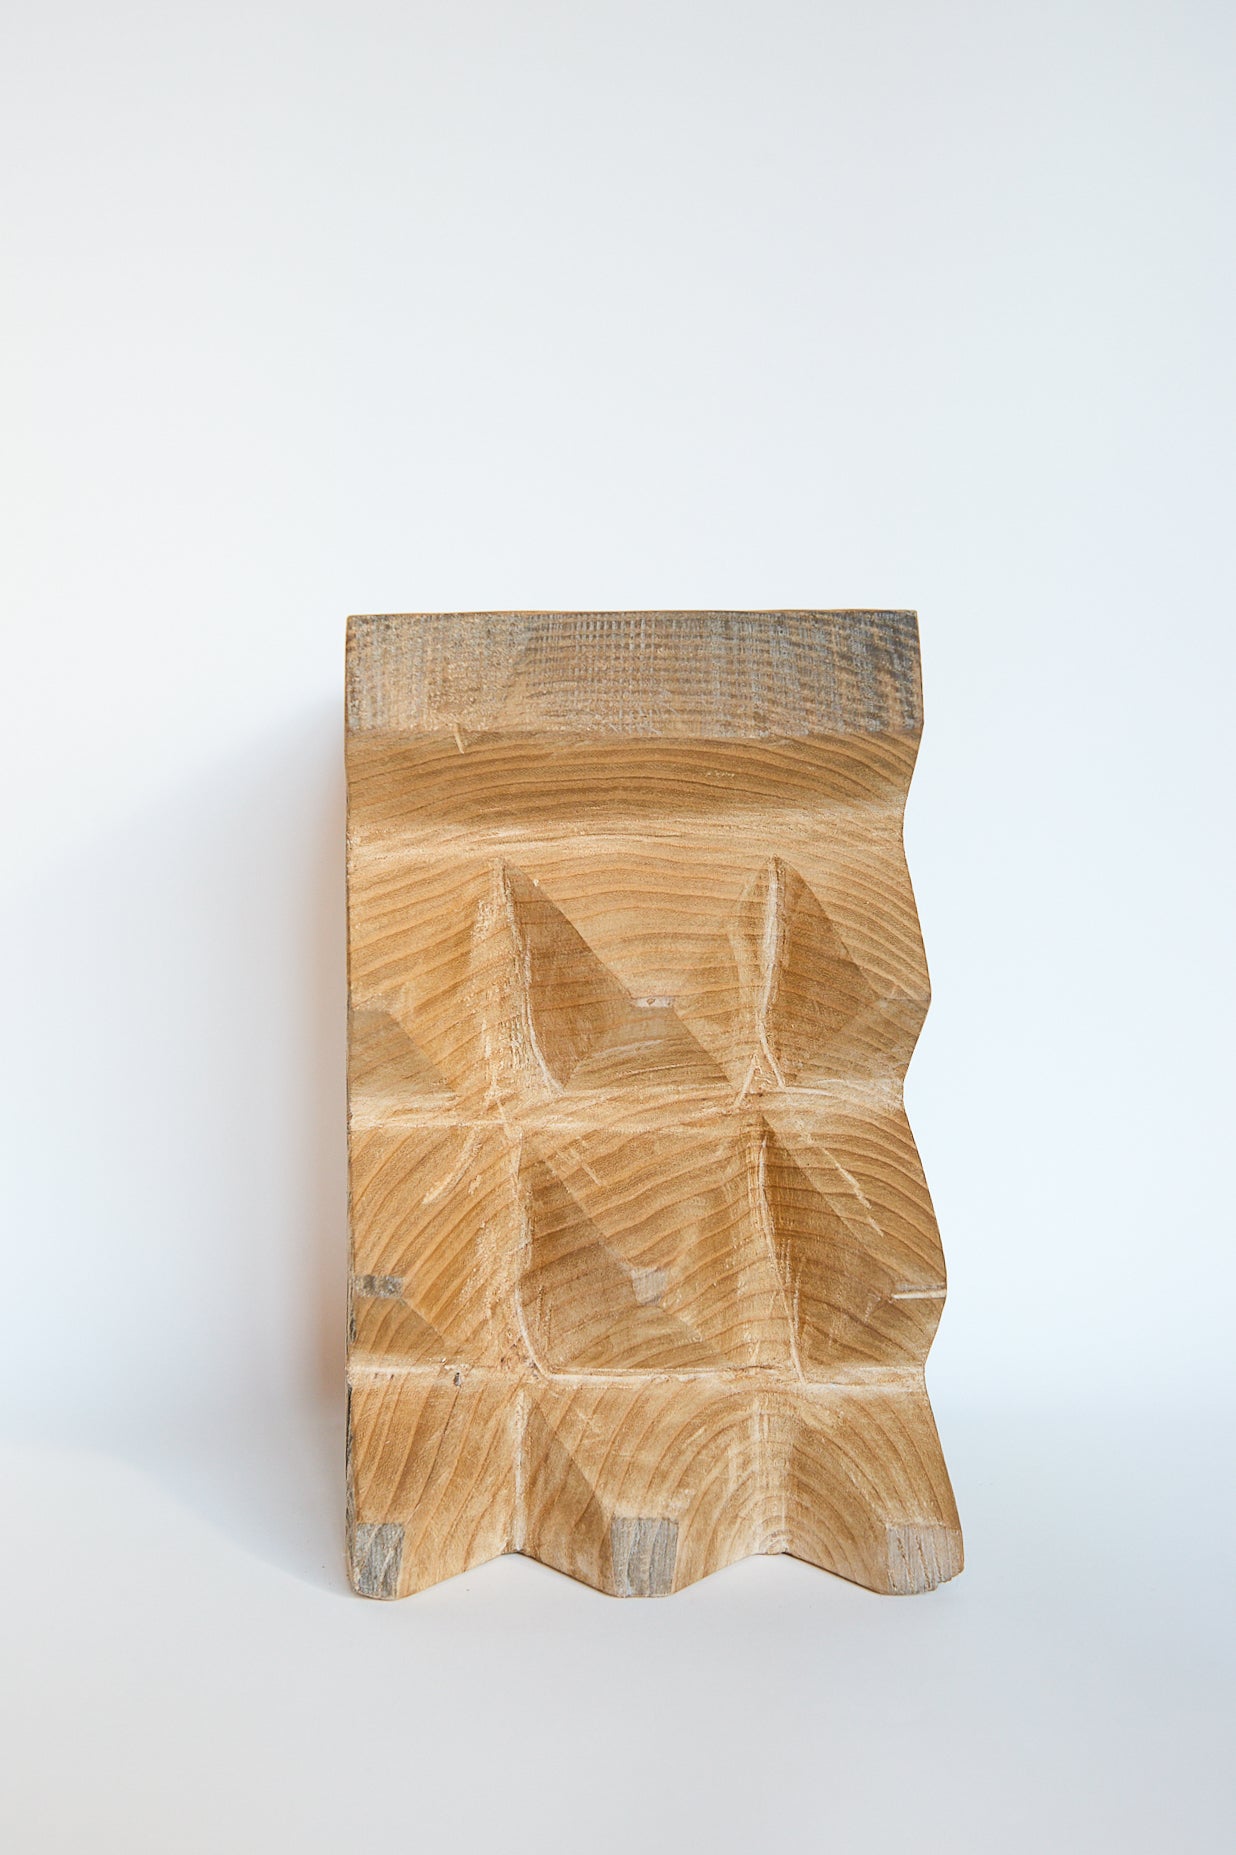 A Cody Brgant Kingston Ash II side table made from Ash tree wood, featuring a unique pattern.